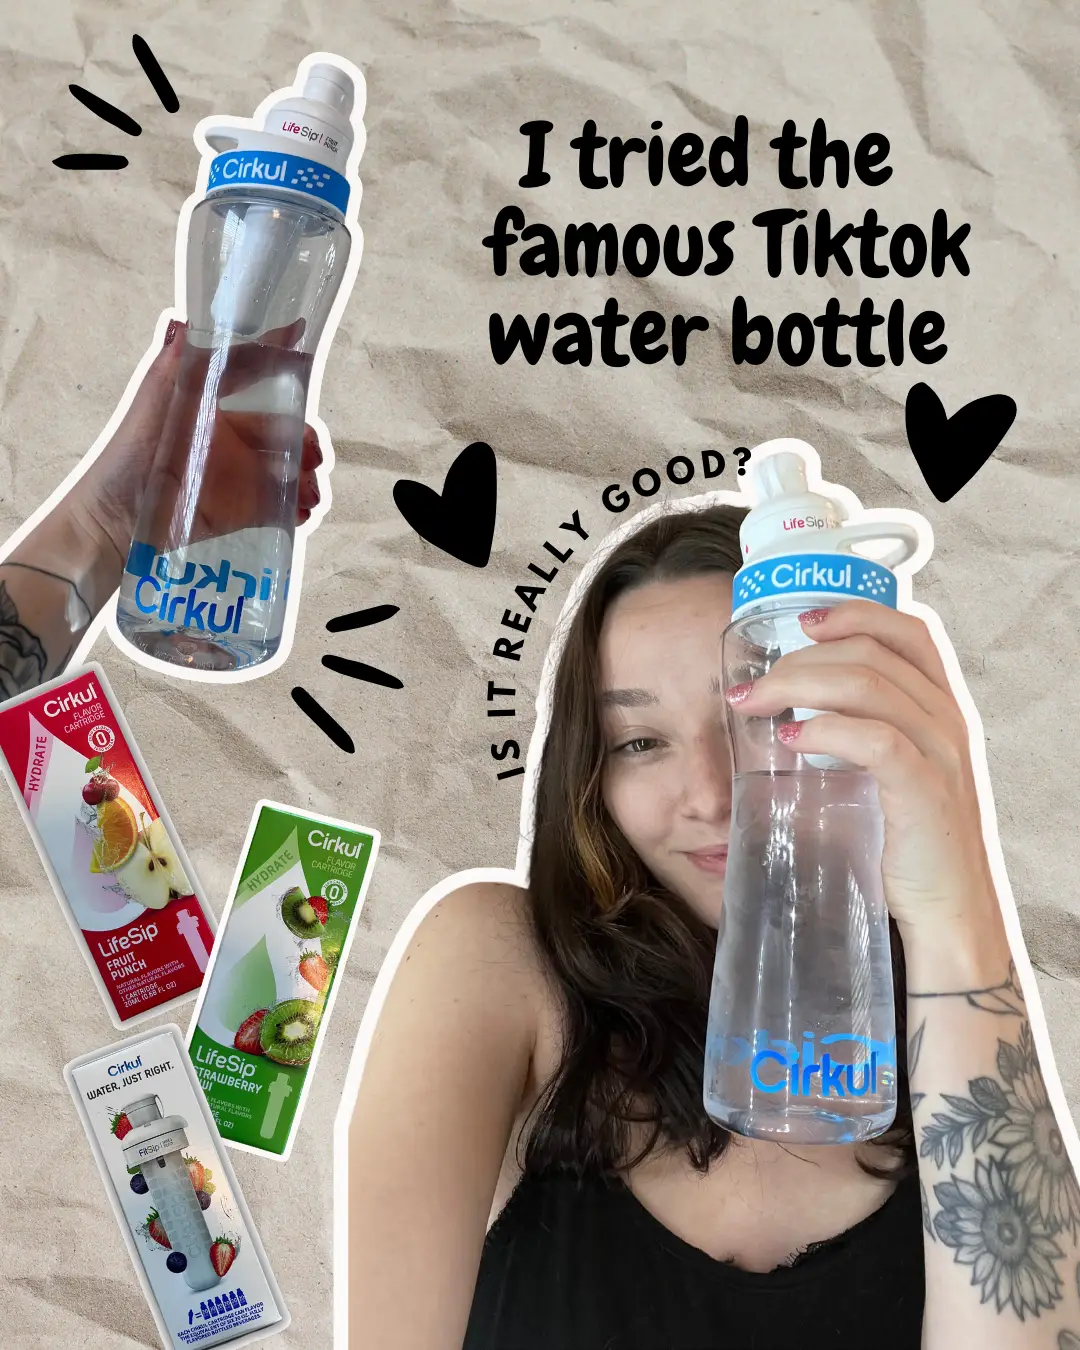 Where to buy a Cirkul, the water bottle taking over TikTok